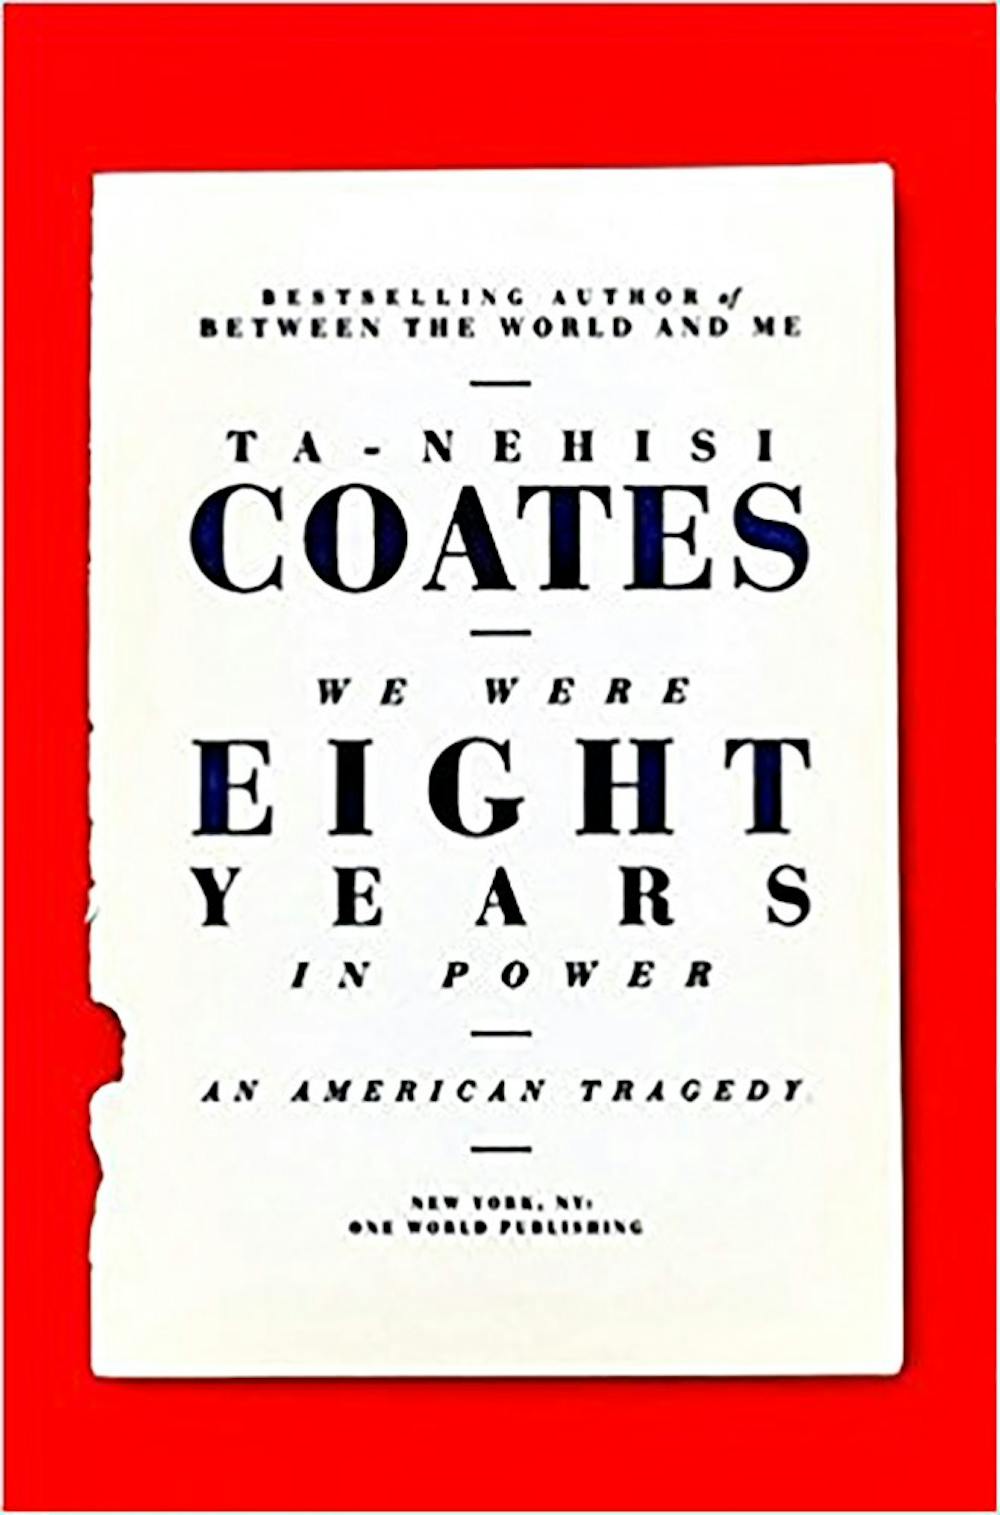 <p>Ta Nehisi-Coates, author and writer for The Atlantic, released his latest book “We Were Eight Years In Power” last week. The book takes a look back at essays penned during the Obama administration and includes personally-inclined notes from the author.</p>